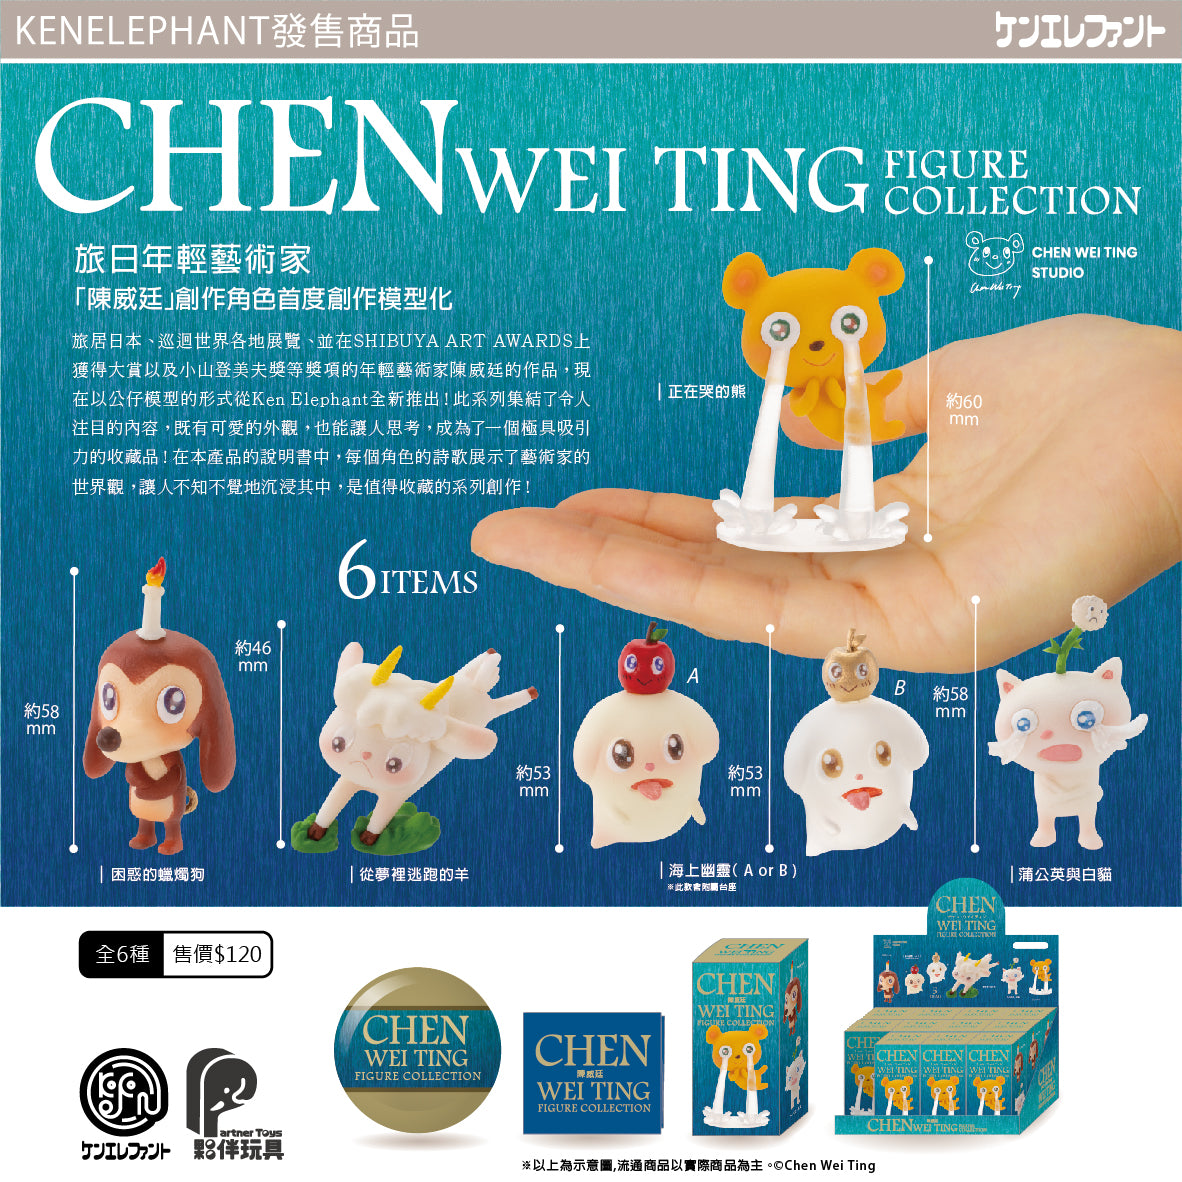 Chen Wei Ting Figure Collection Product Detail